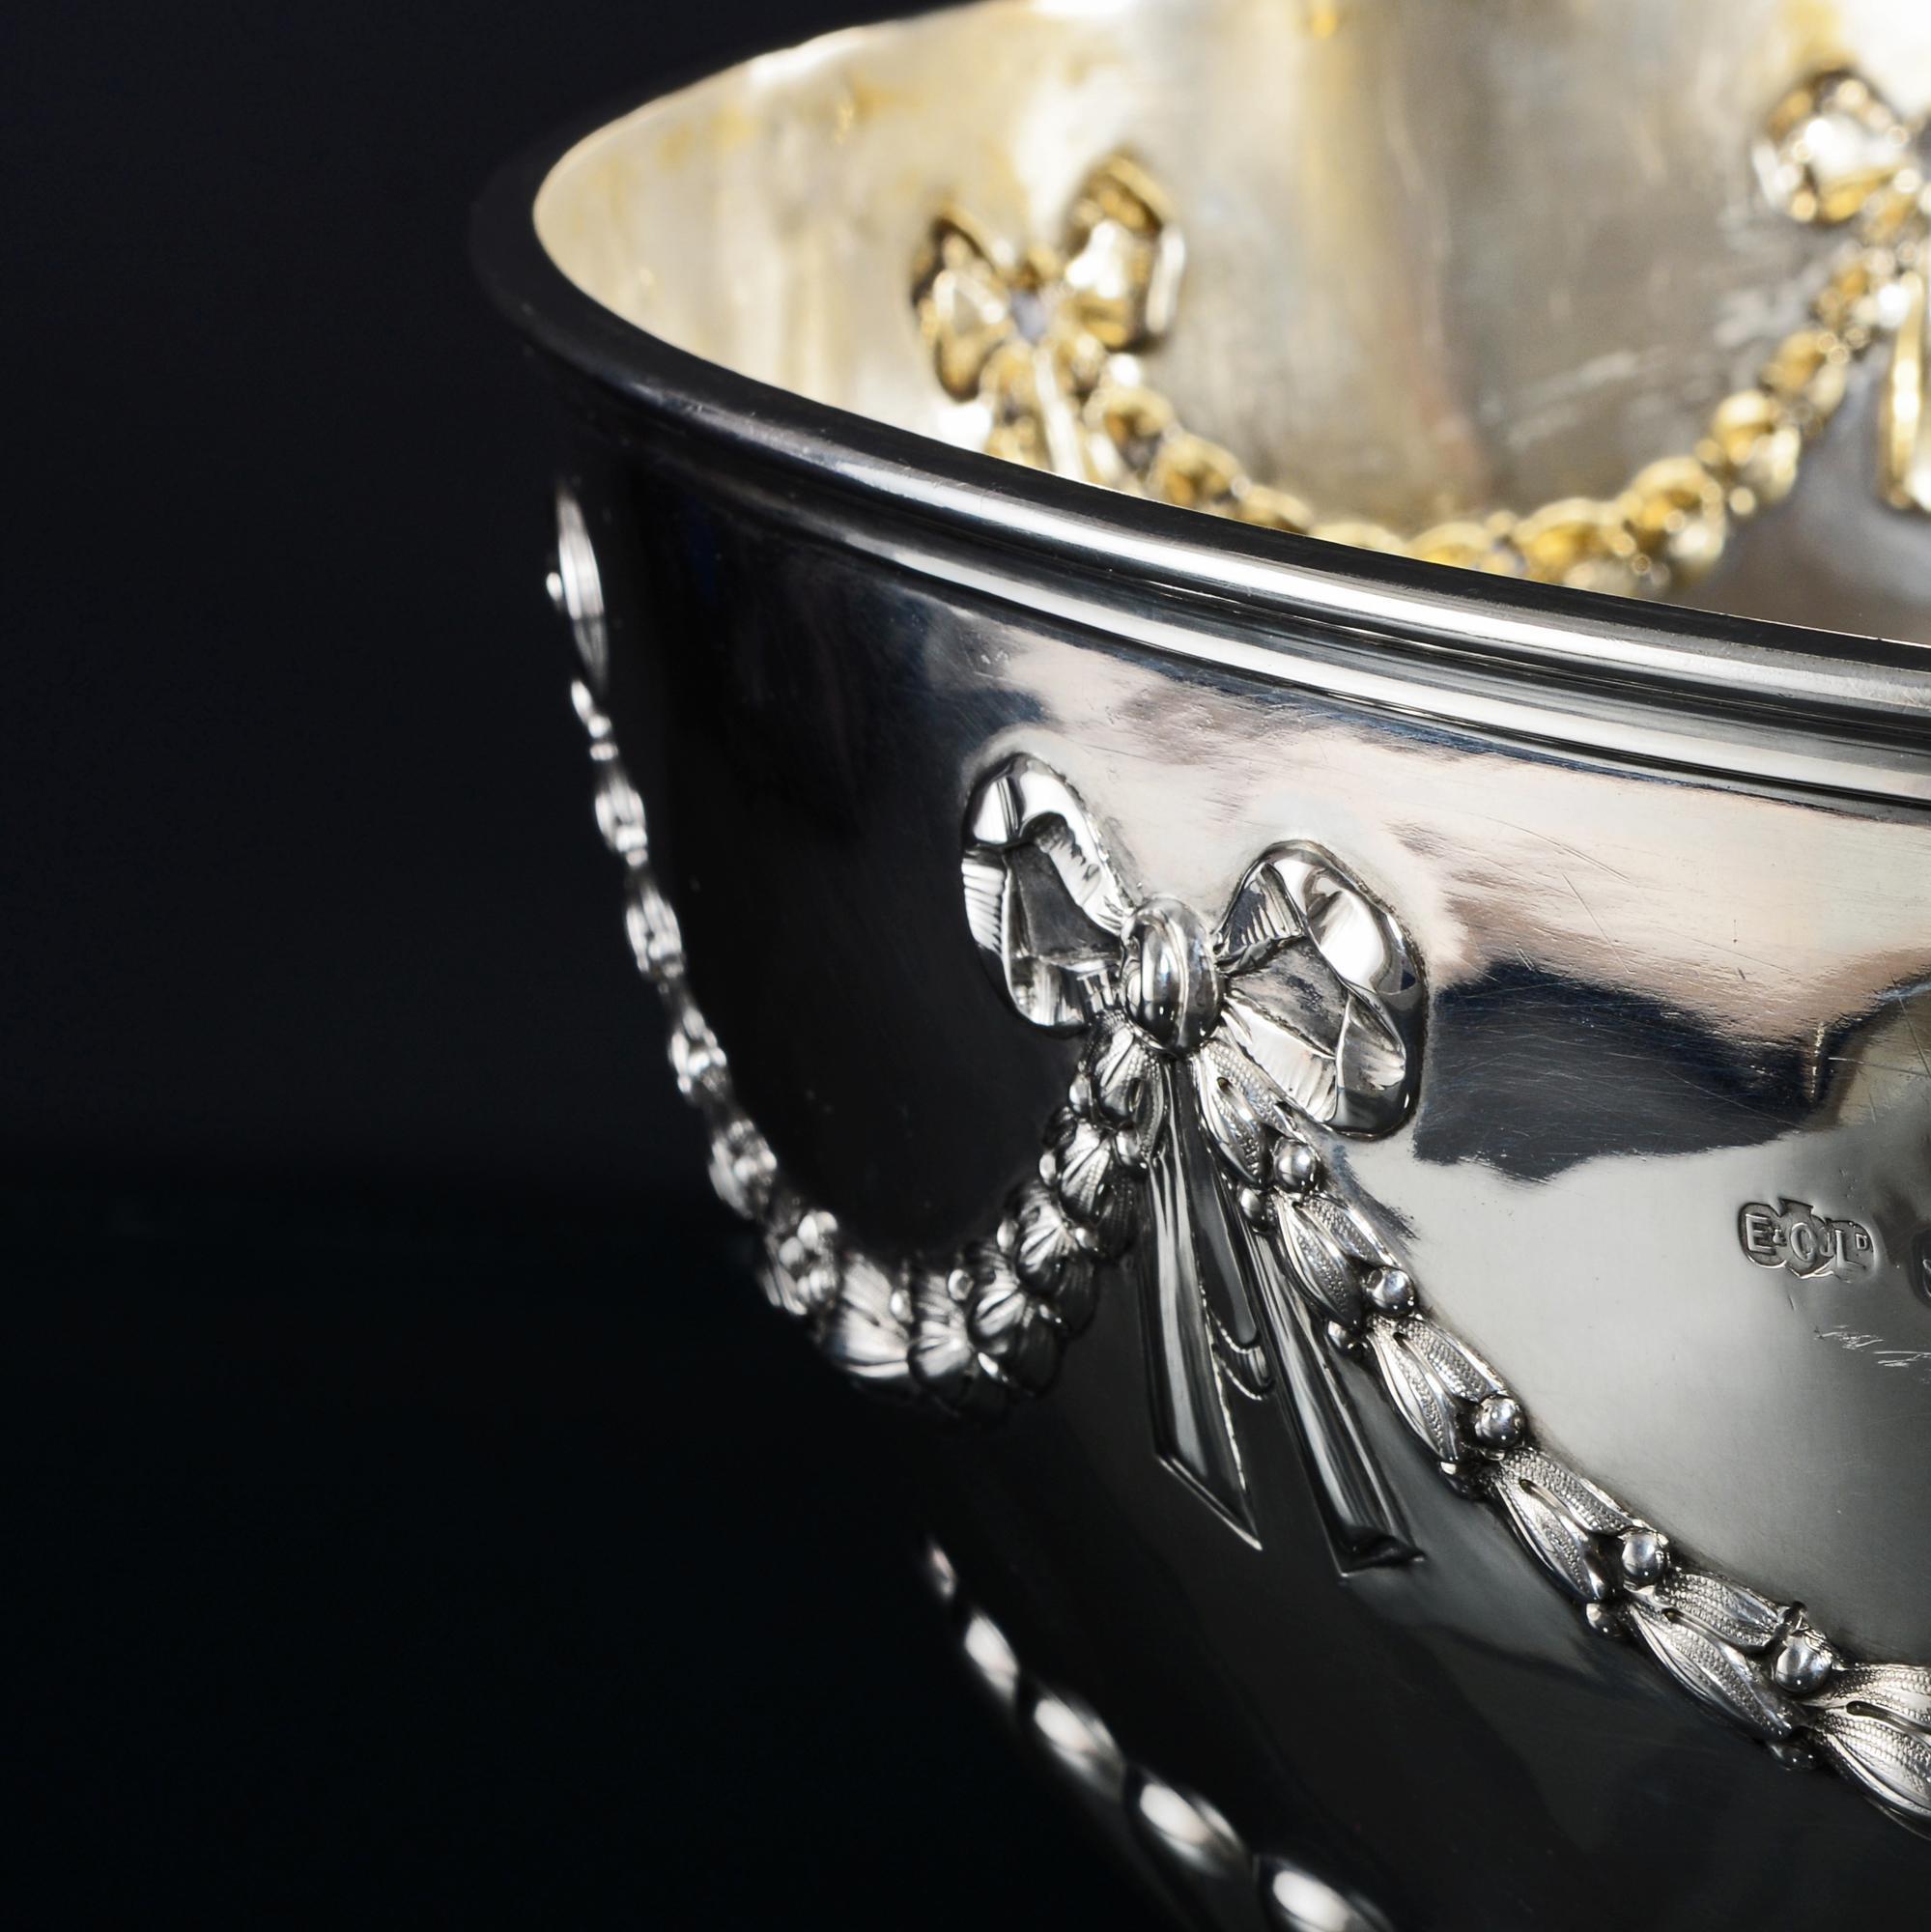 This large and impressive antique silver punch bowl was made by Elkington & Co in 1893. It is substantially heavy, weighing almost 100 troy oz, and is classically decorated with half-fluting to the bottom half of the bowl with a band of harebell